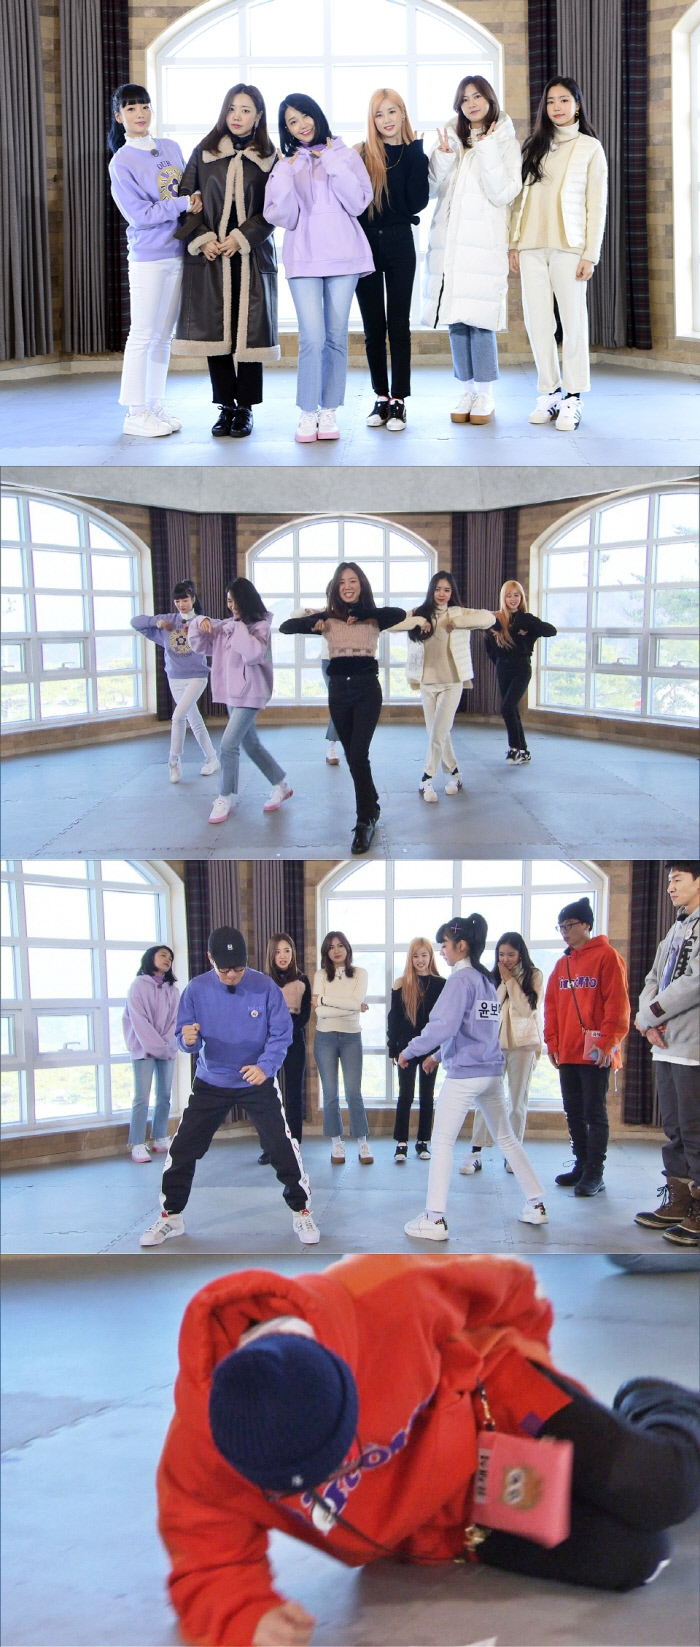 Apink will appear on SBS <Running Man> on the 6th.Apink, who is about to make a comeback soon, participated in the recent recording of Running Man and released the new song Applying % for the first time.The members then went on to re-challenge Low kick to Bomi.Bomi humiliated Ji Suk-jin and actor Shin Sung-rok with a low kick at the time of his last appearance. Ji Suk-jin said, I think I can succeed today. But eventually he collapsed in another room and laughed.Yoo Jae-Suk laughed at Ji Suk-jin and challenged the low kick of the lantern, which is the third stage of the Aikido official.Despite Apinks dissuade, Yoo Jae-Suk looked confident, but in a powerful low kick of lanterns, Yoo Jae-Suk sat down right in his seat and did not wake up for a long time as if he were ashamed.Kim Jong Kook humiliated Yoo Jae-Suk, saying, My face has become purple.On the other hand, <Running Man> is expected to attract viewers attention by being decorated with a new project for the 2019 New Year.Running Man, which has been richer in 2019, from the first appearance of the Apink complete to the New Project, will air at 5 pm on Sunday, 6th.